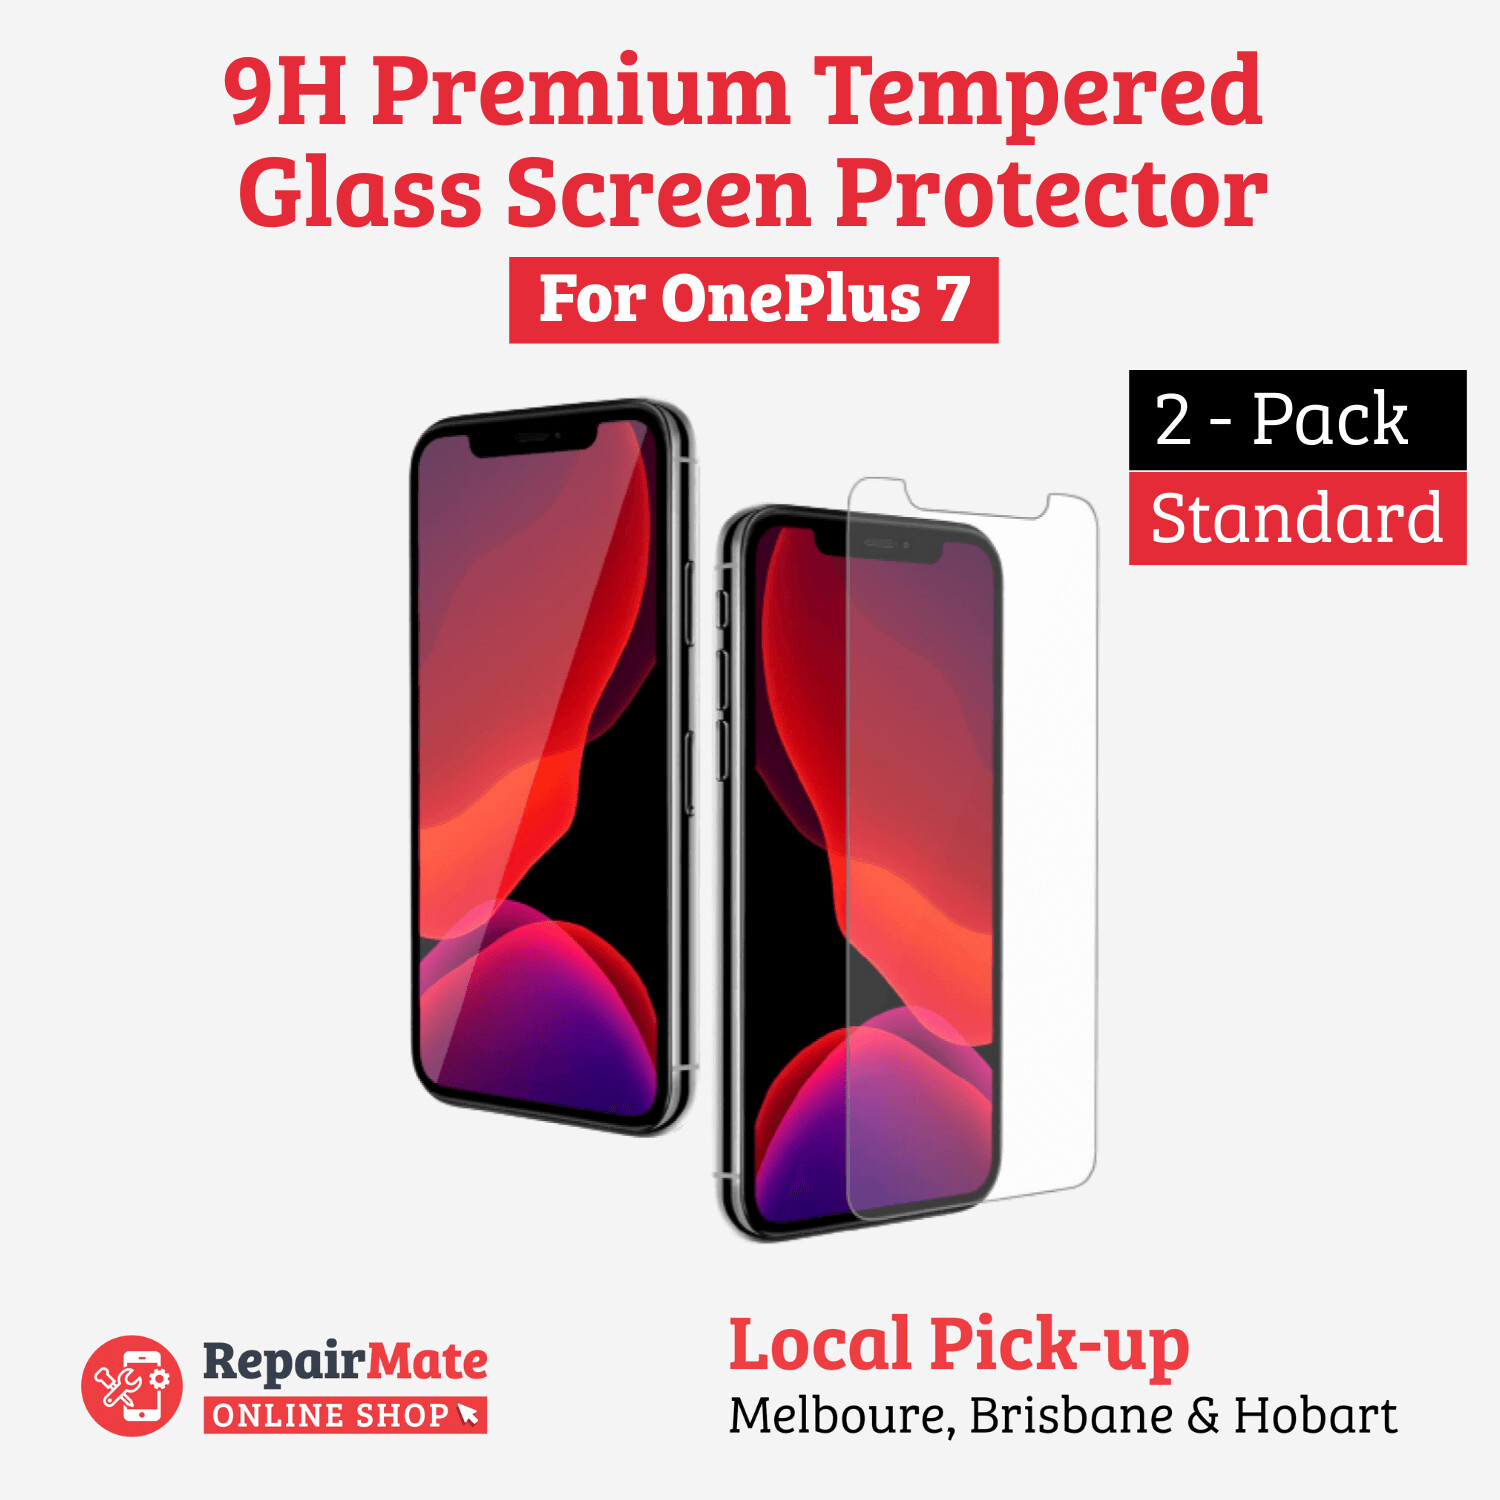 OnePlus 7 9H Premium Tempered Glass Screen Protector [2 Pack]